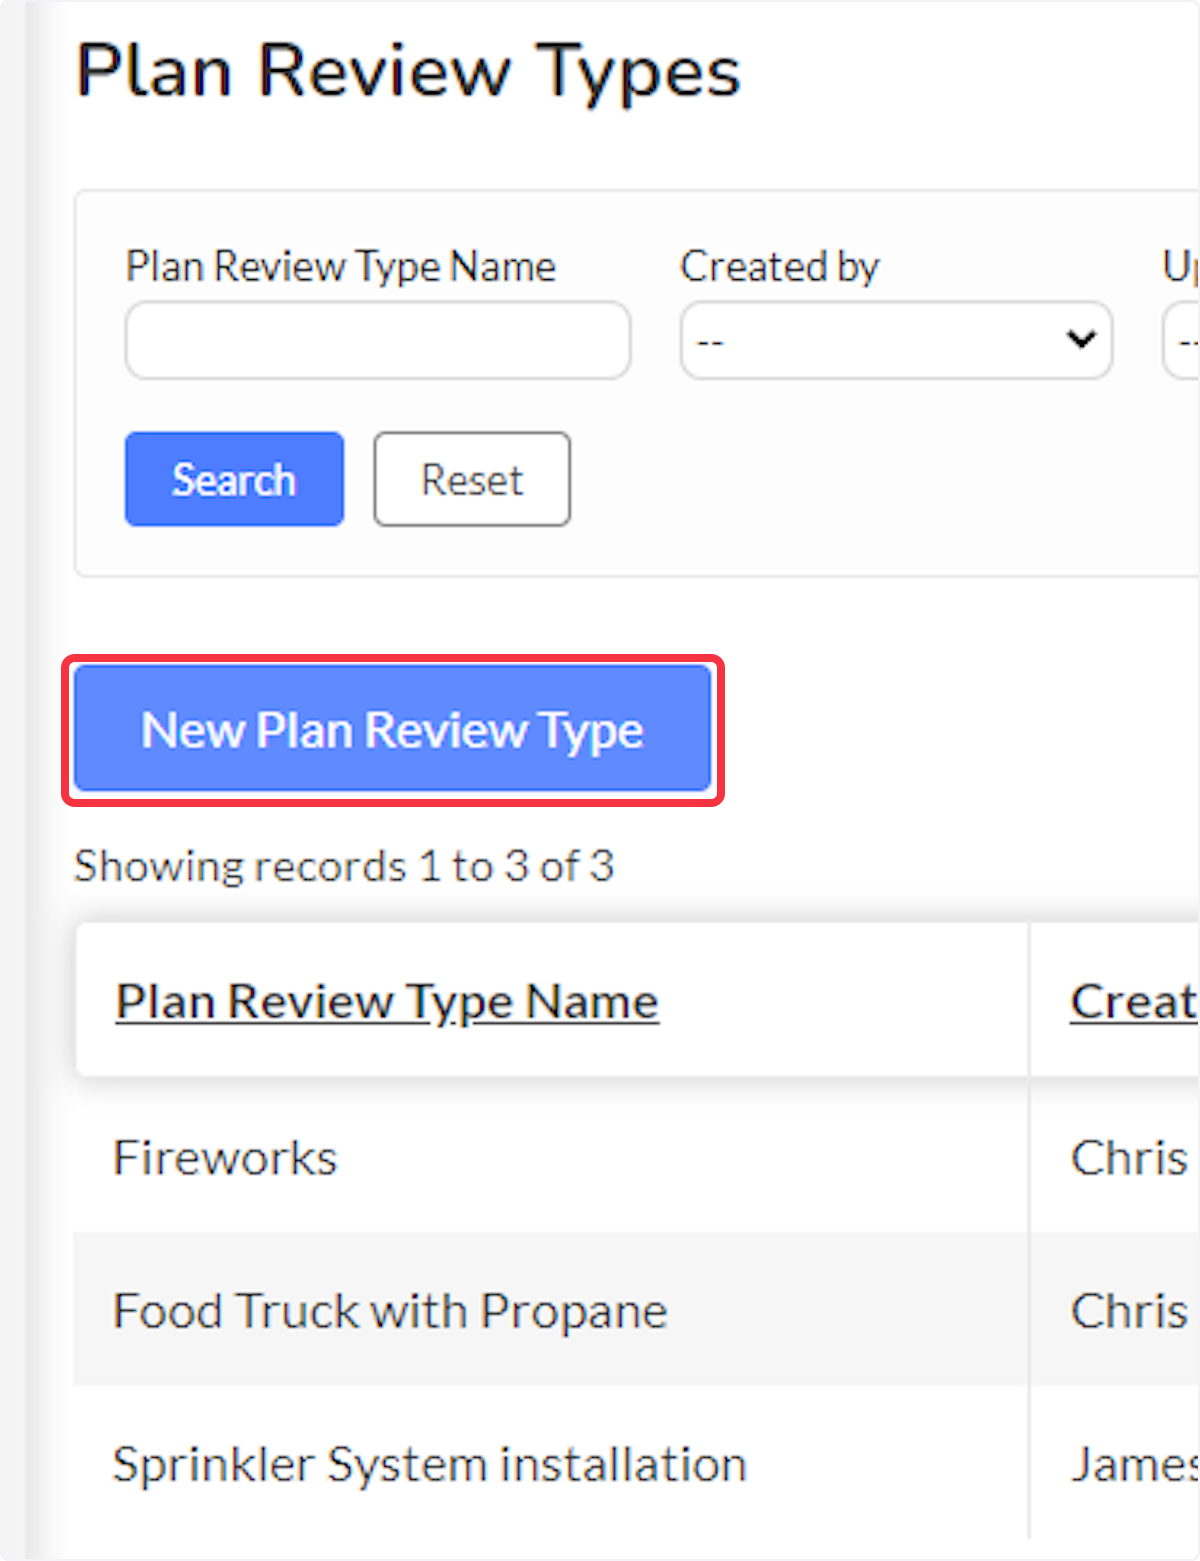 Click on New Plan Review Type.